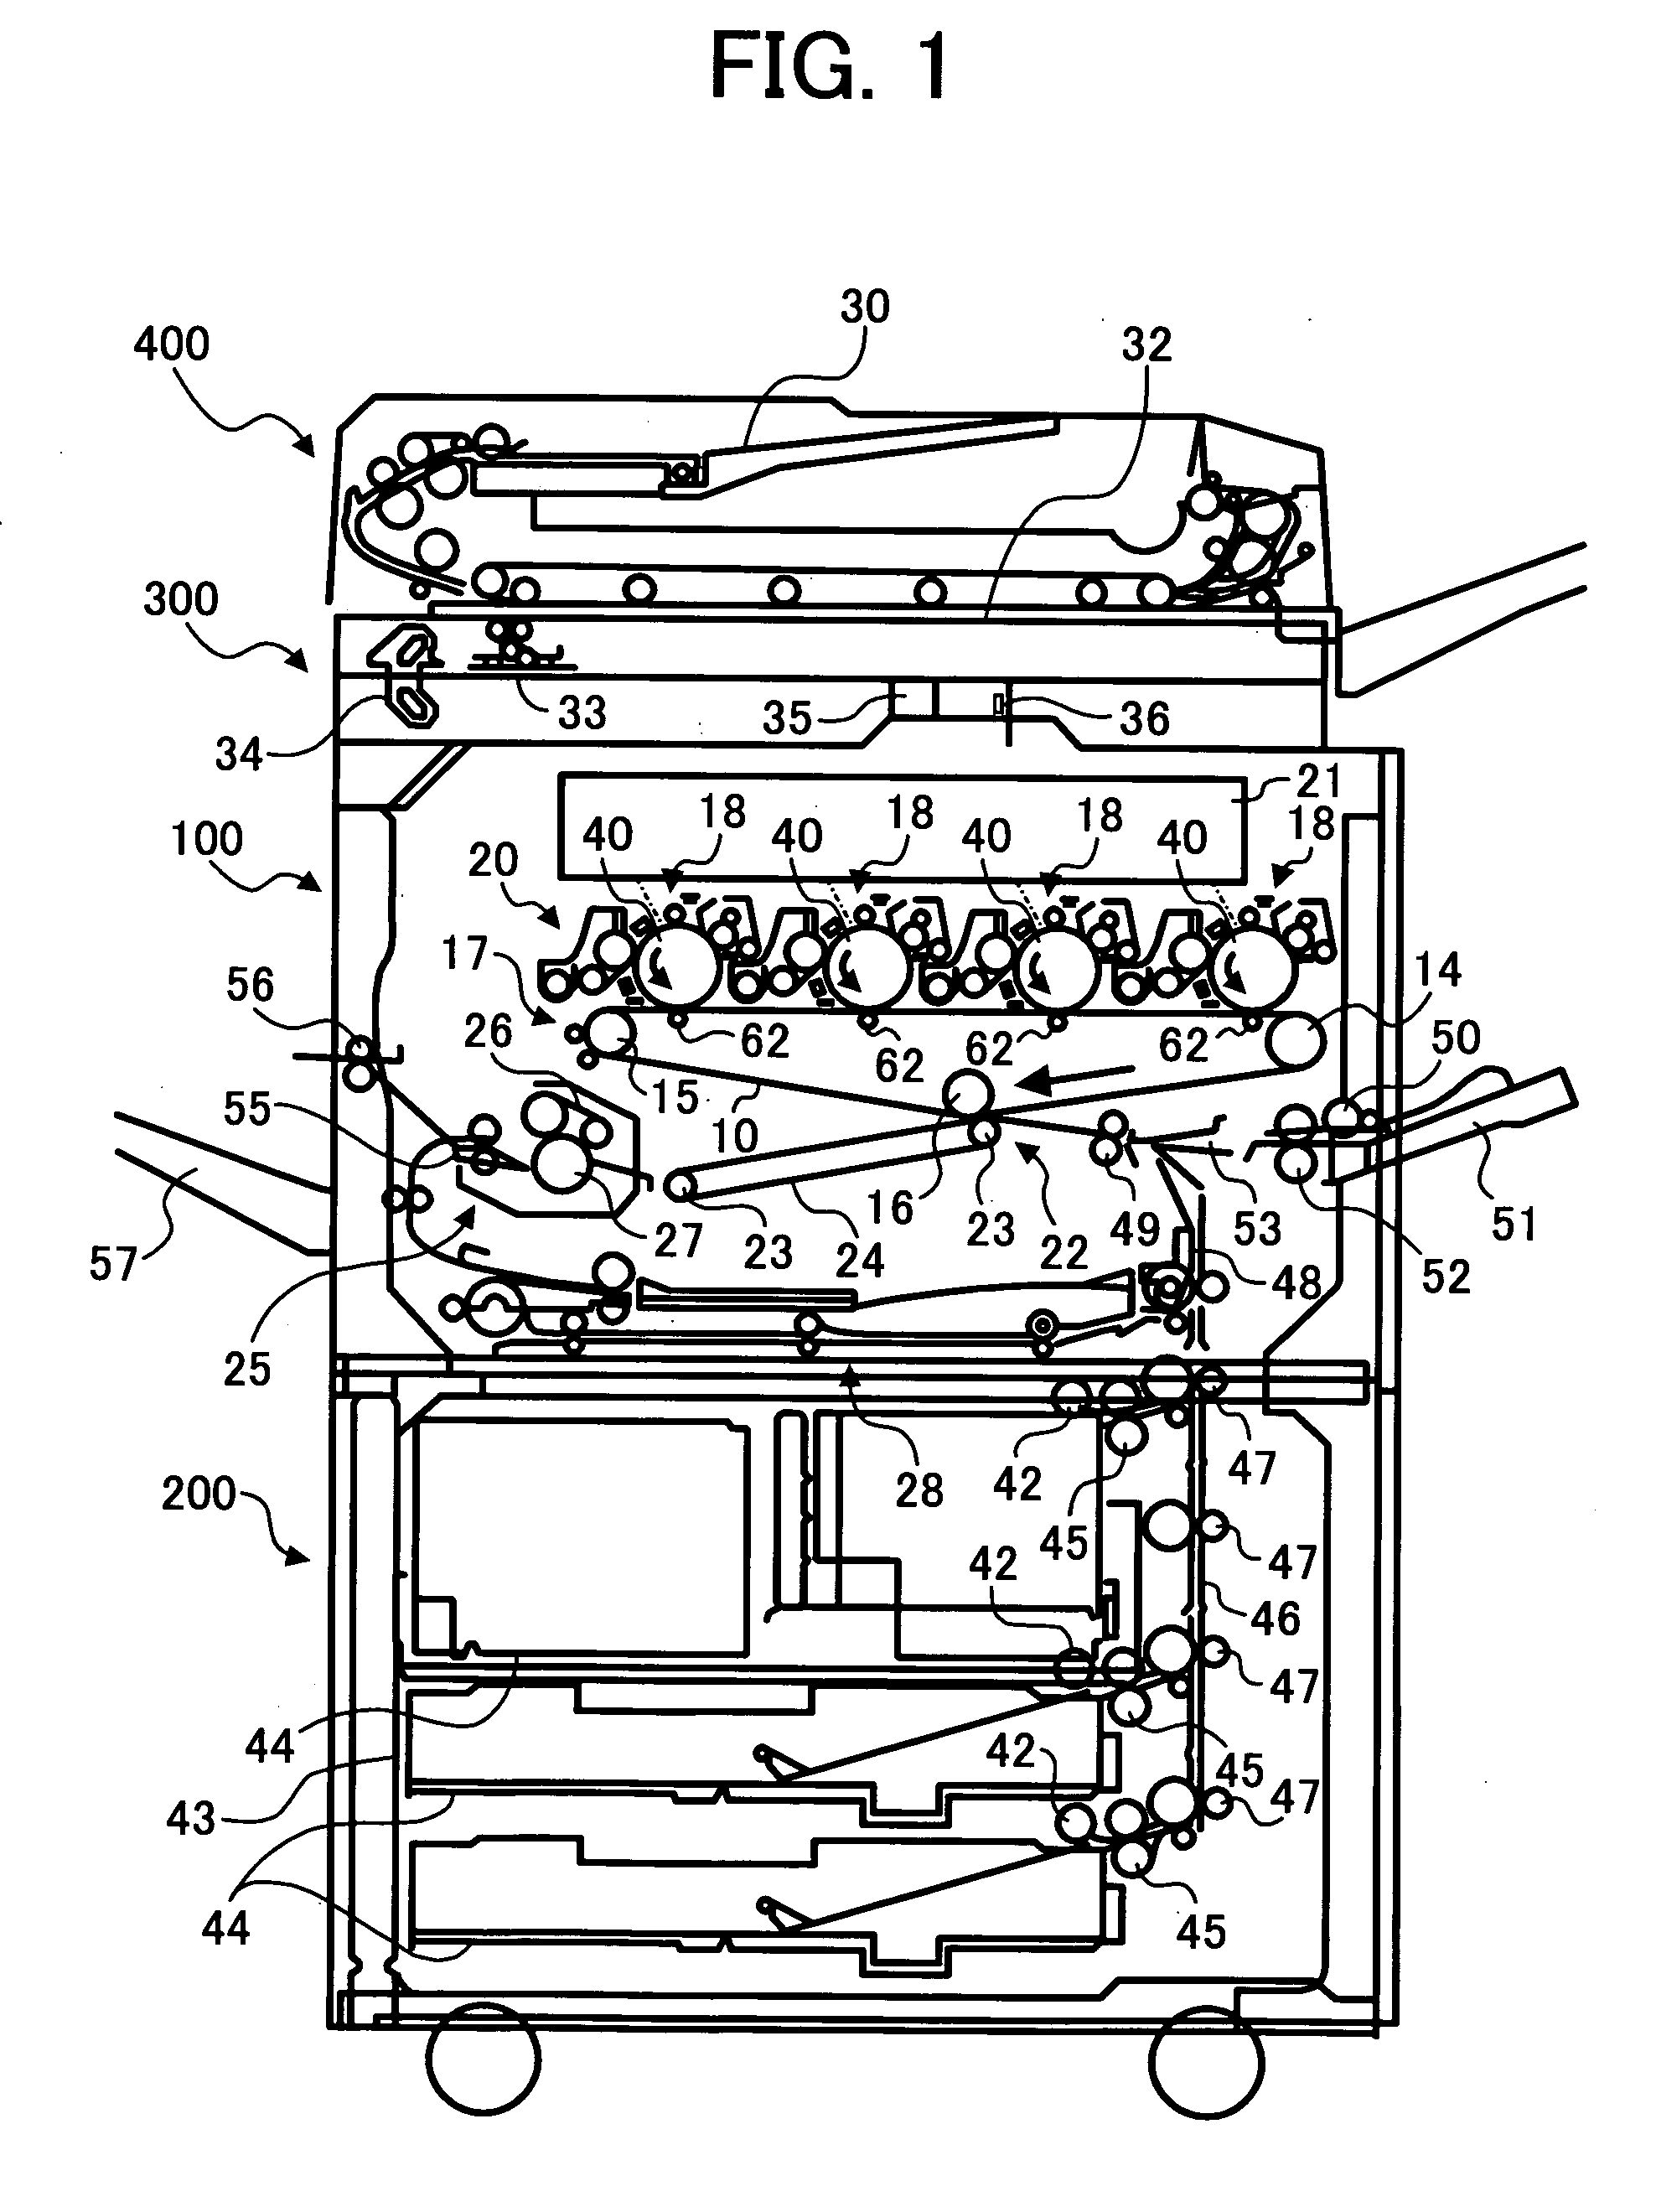 Toner container, toner supply device and image forming apparatus